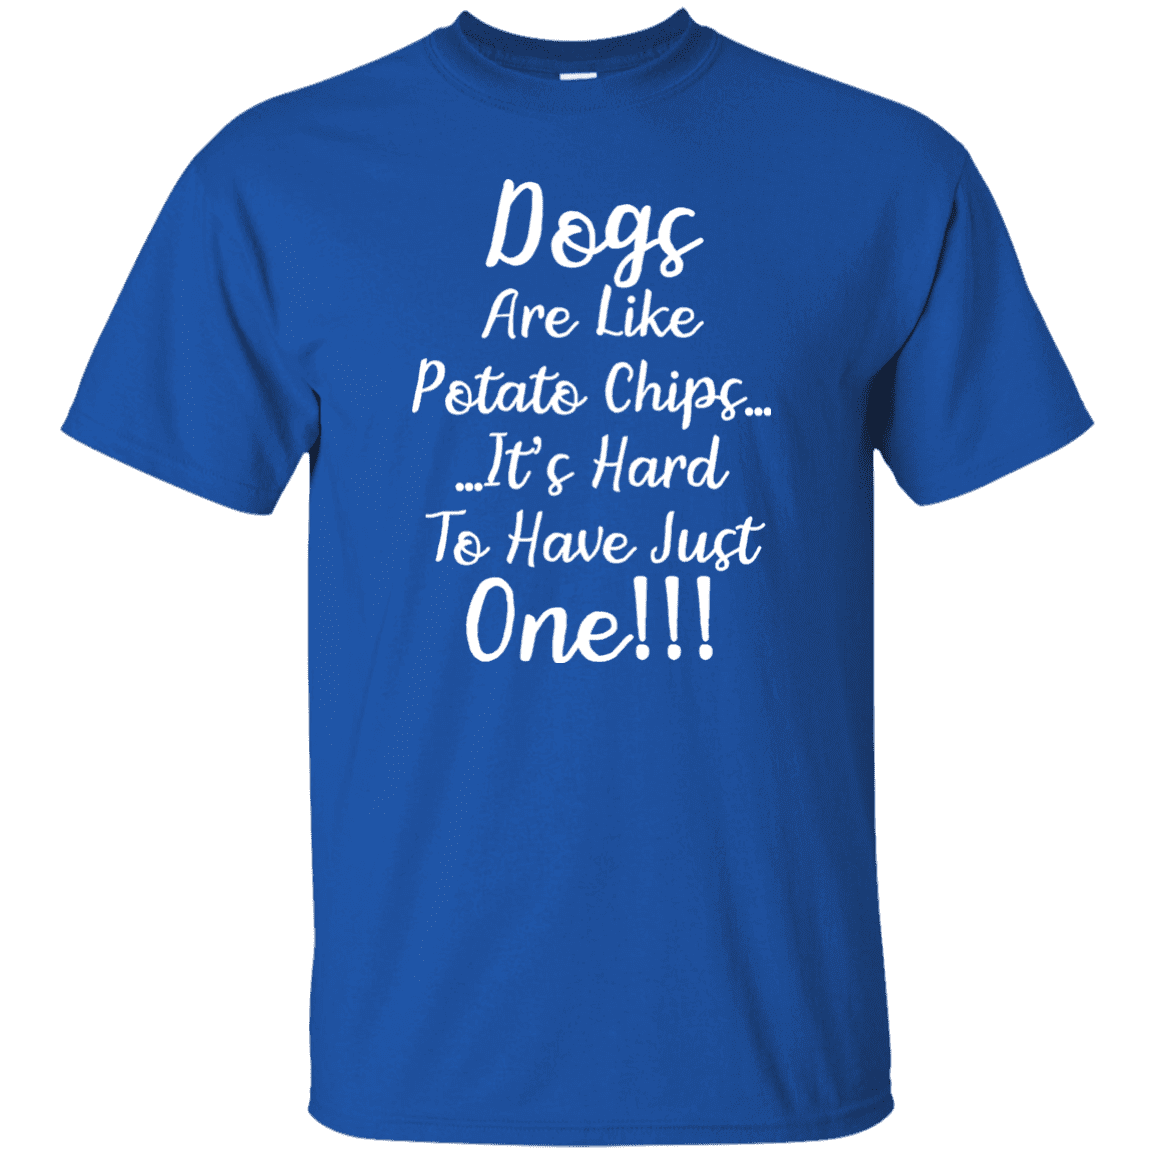 Dogs Are Like Potato Chips - T Shirt.